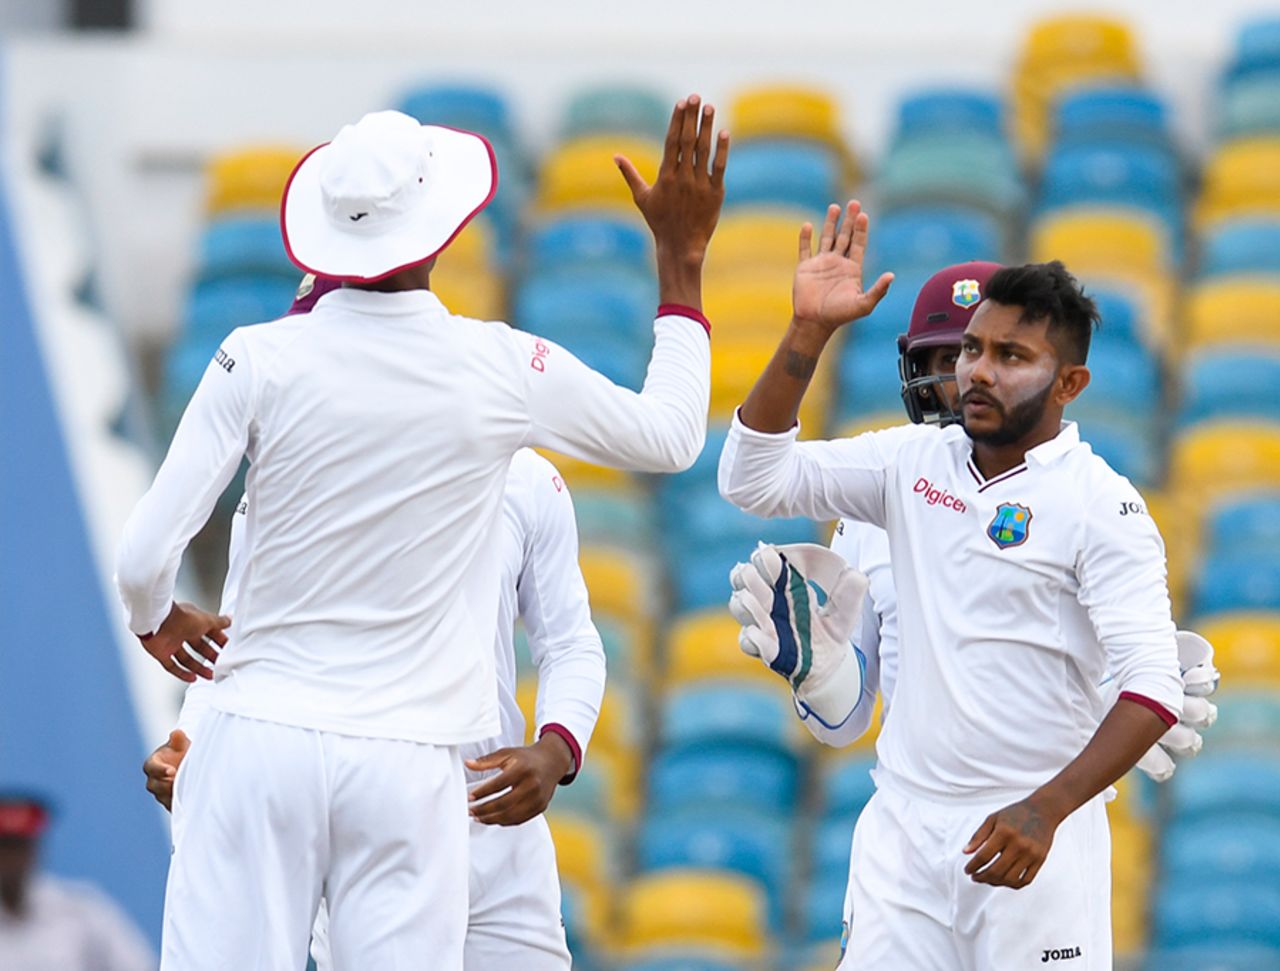 Devendra Bishoo picked up two of the three Pakistan wickets in the final session, West Indies v Pakistan, 2nd Test, Bridgetown,2nd day, May 1, 2017